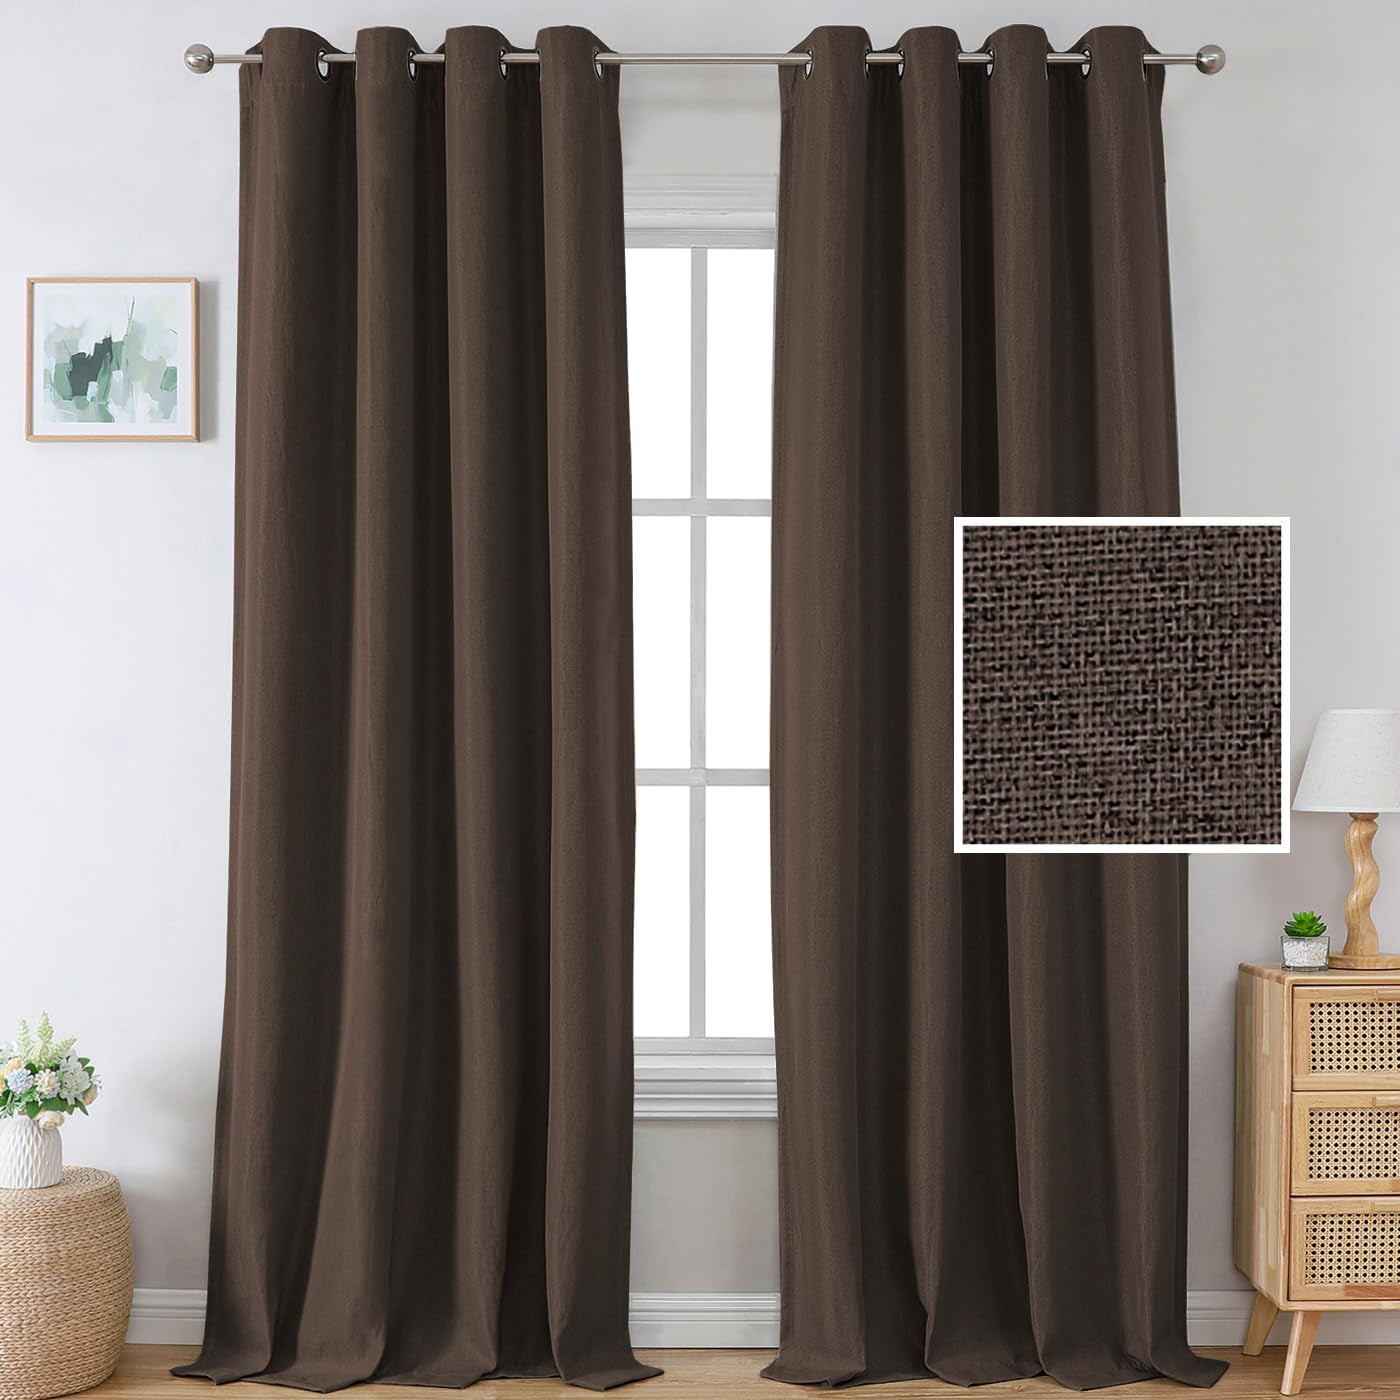 H.VERSAILTEX Linen Blackout Curtains 84 Inches Long Thermal Insulated Room Darkening Linen Curtains for Bedroom Textured Burlap Grommet Window Curtains for Living Room, Bluestone and Taupe, 2 Panels  H.VERSAILTEX Dark Brown 52"W X 96"L 